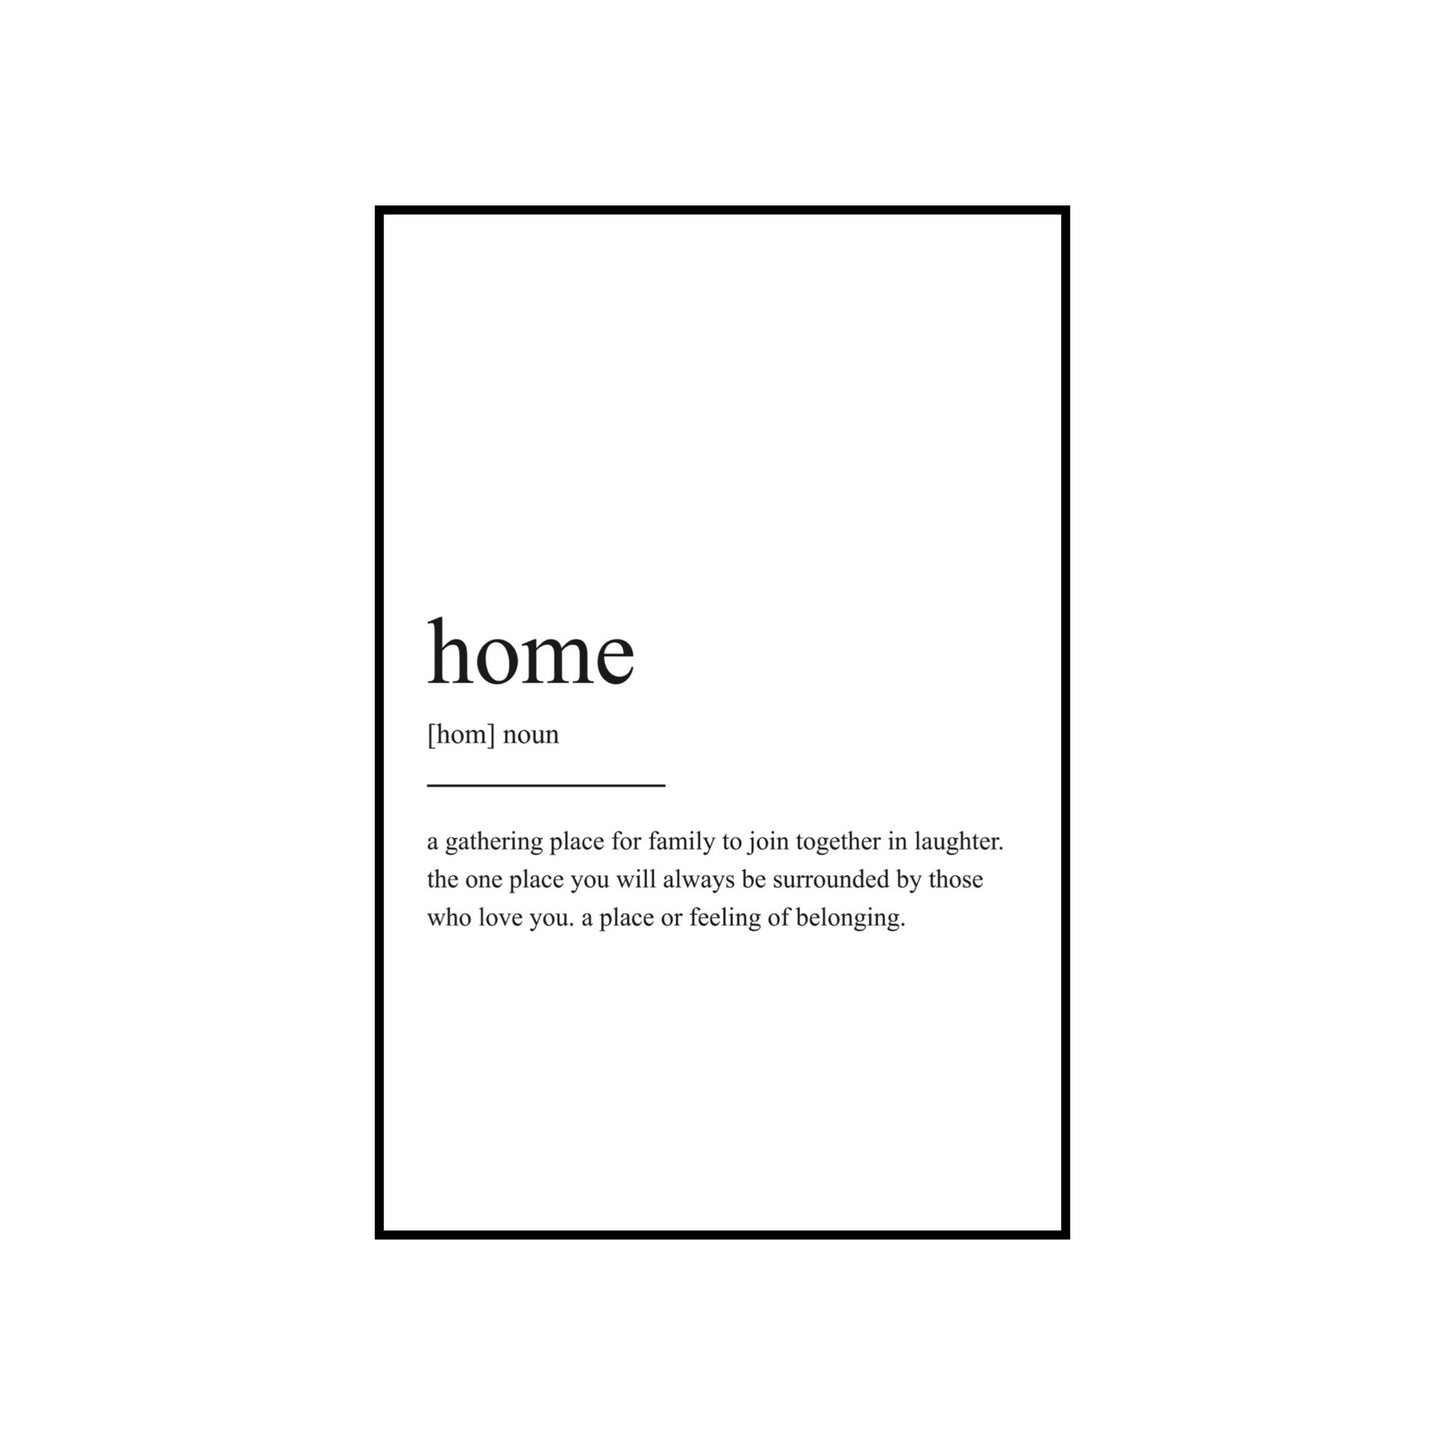 Home definition